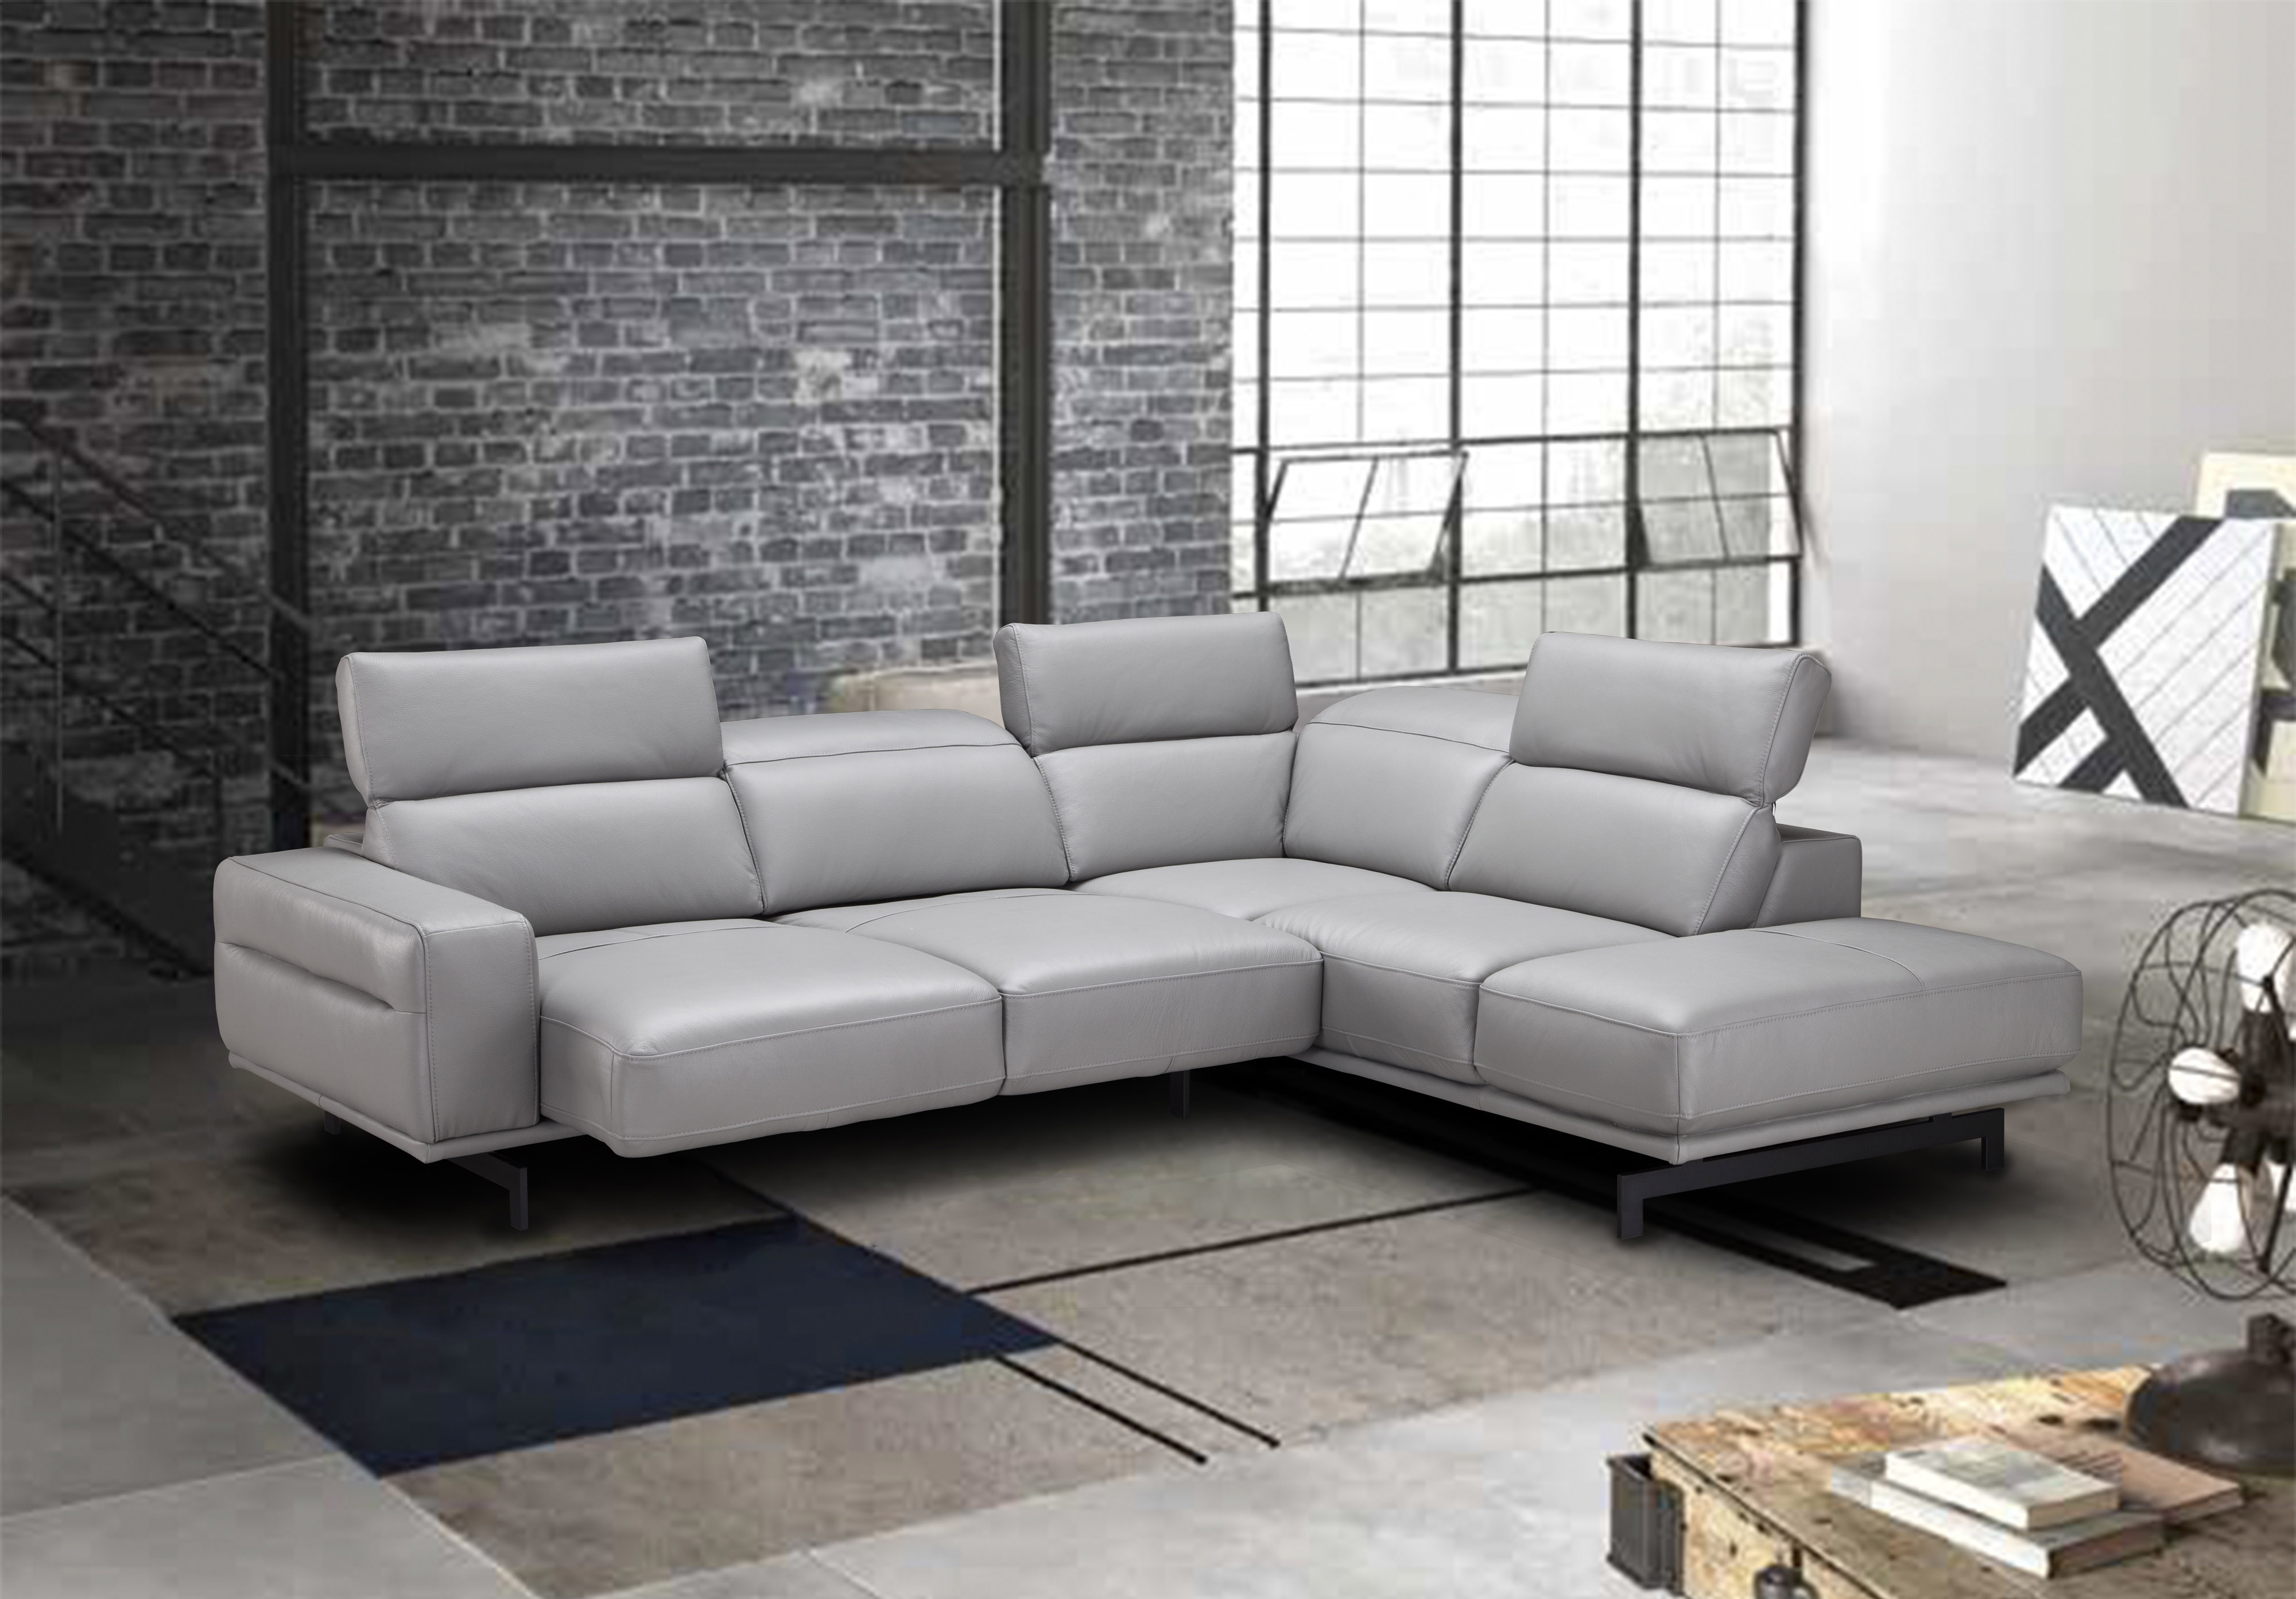 Discount Living Room Sectional Houston Tx